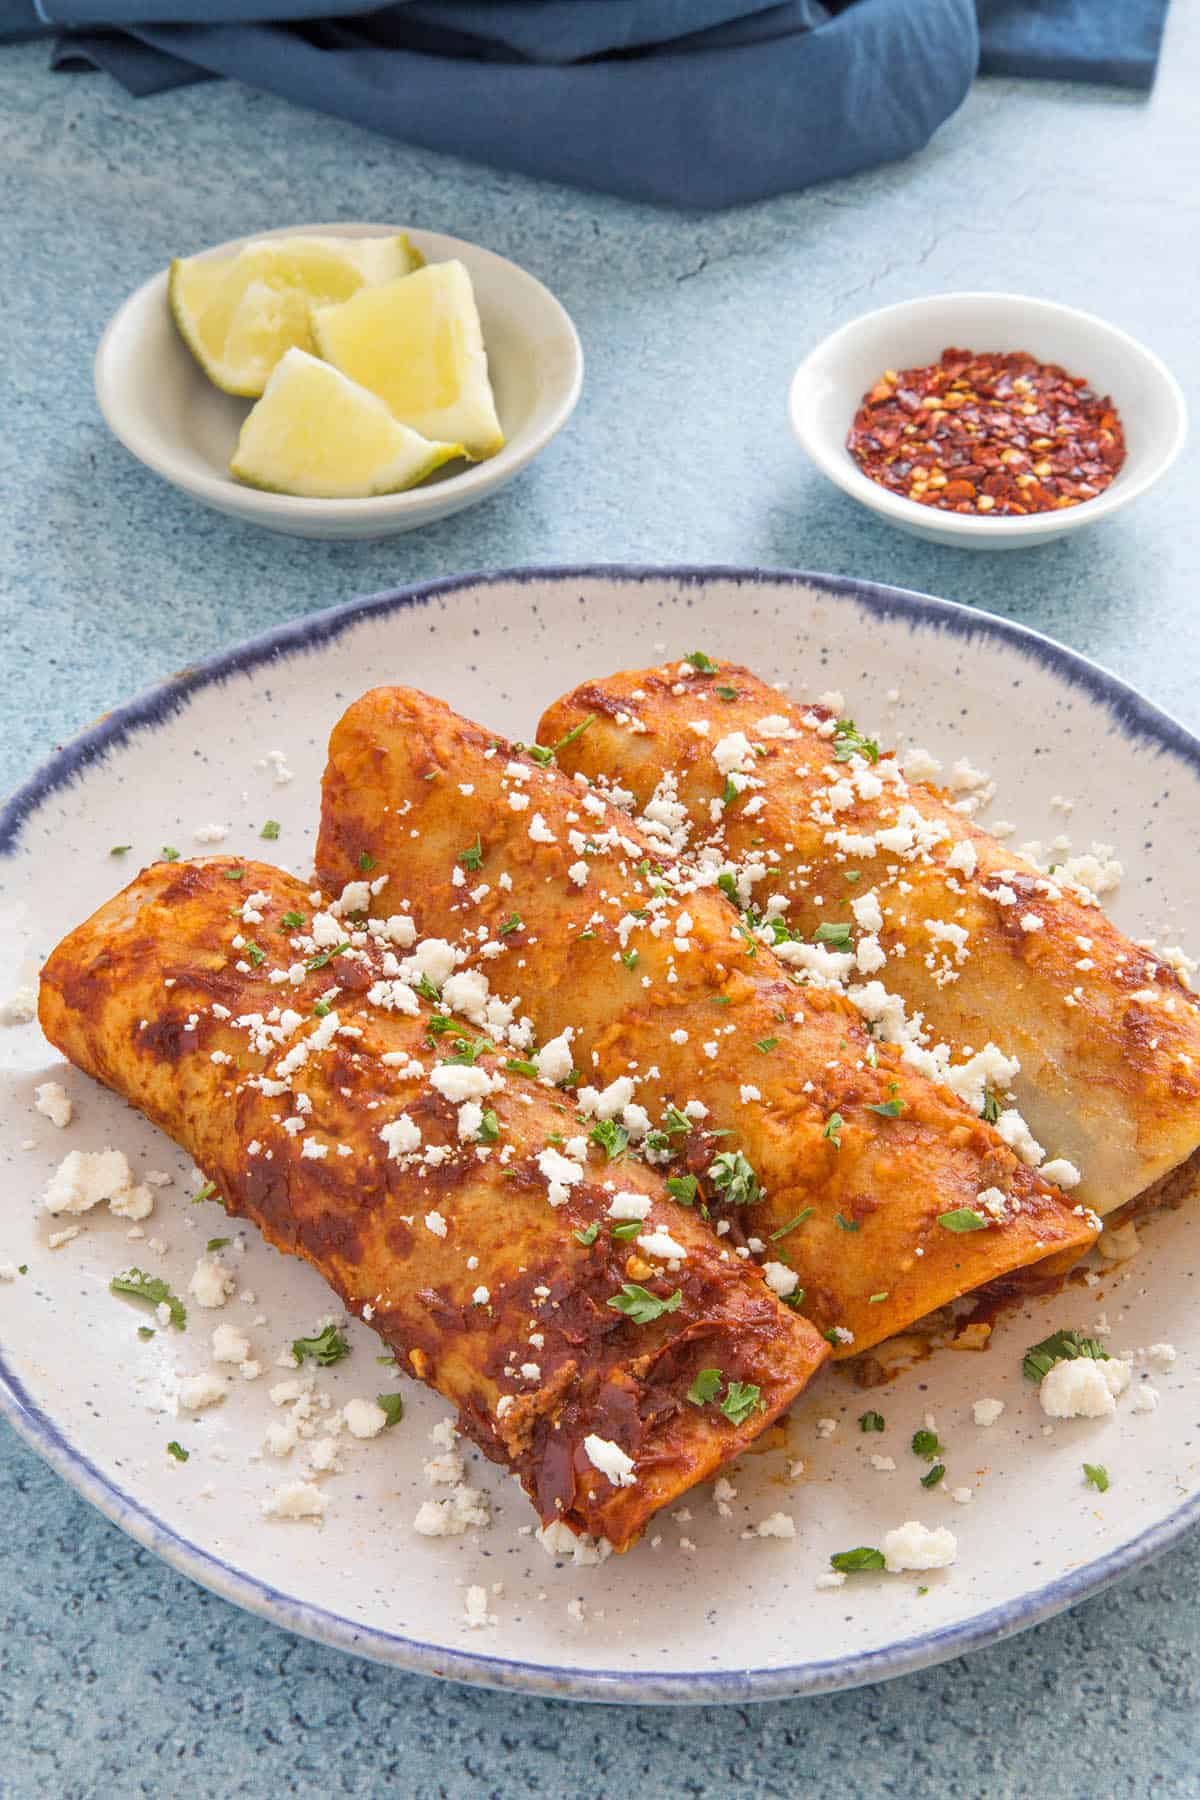 Beef Enchiladas served on a plate